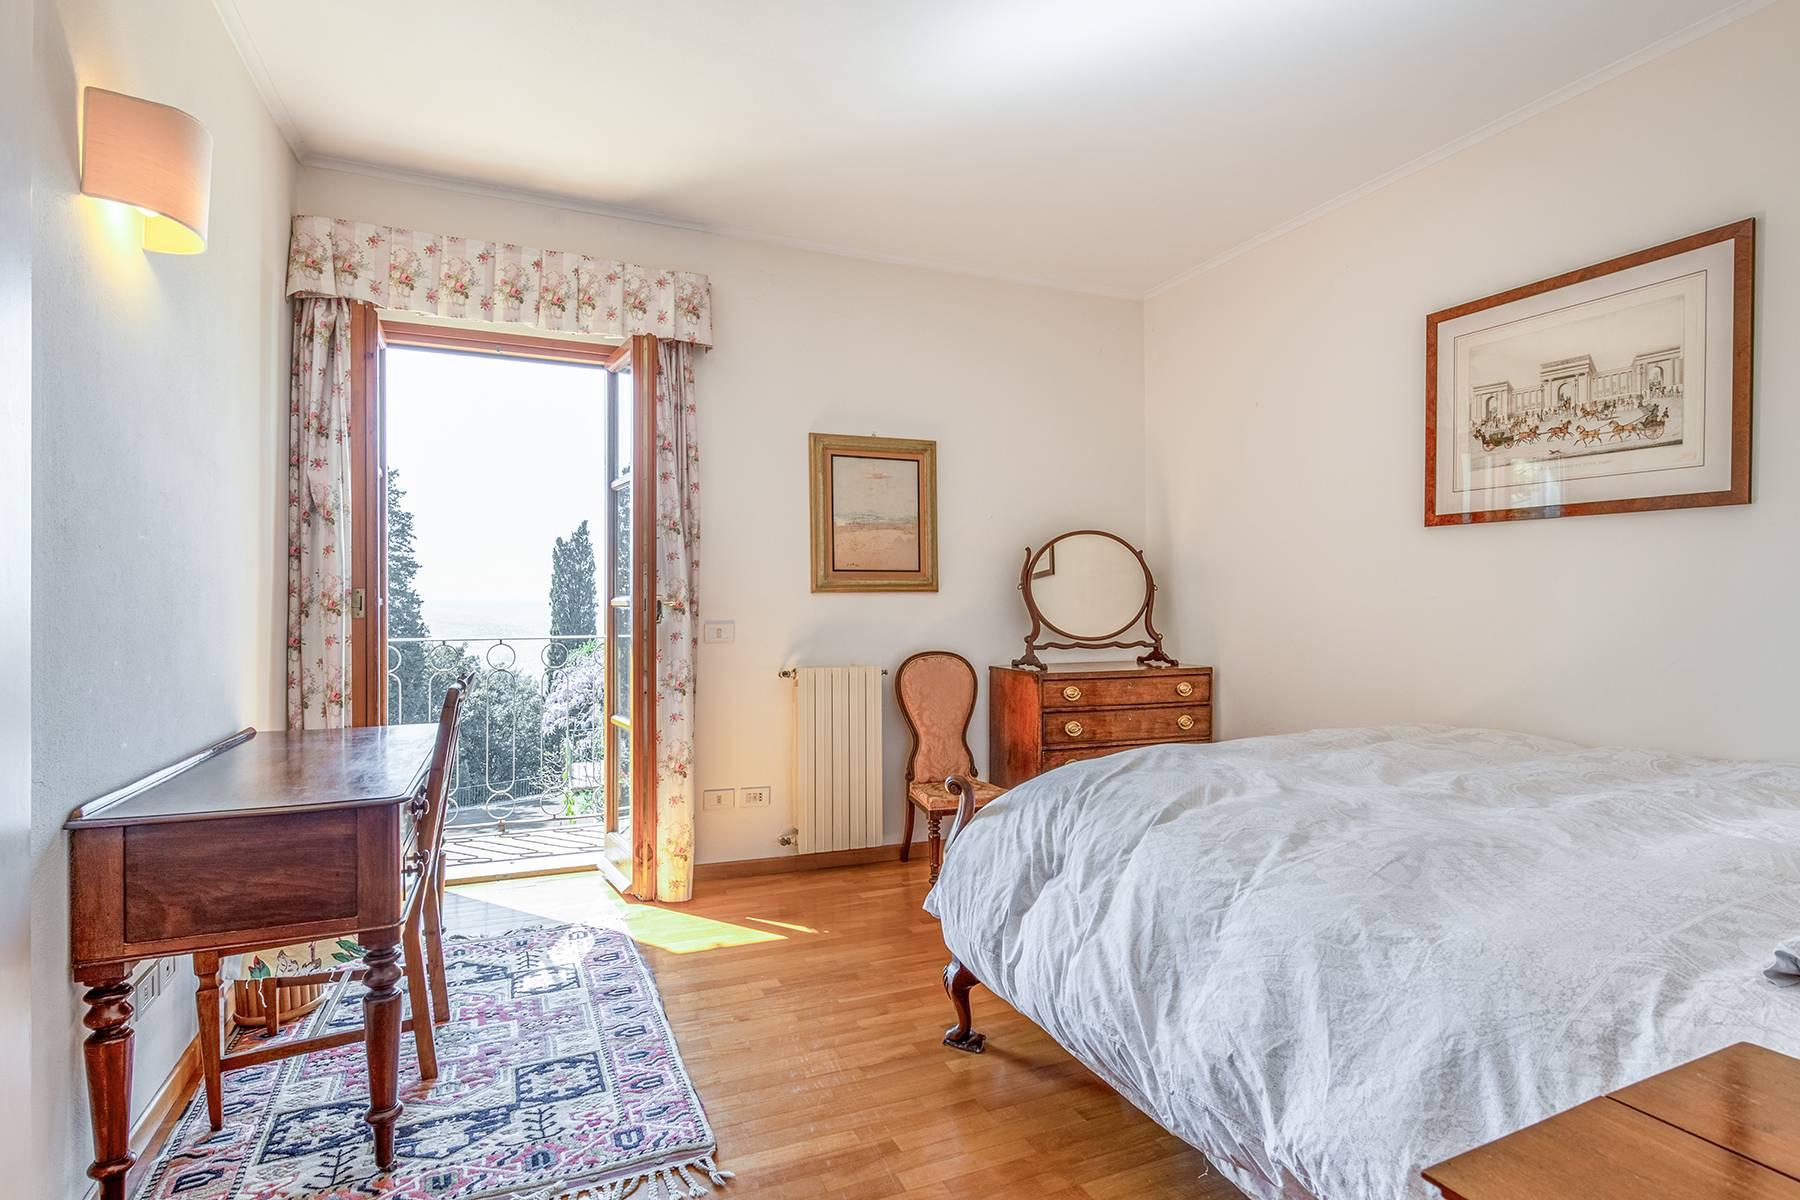 Exquisite villa with a stunning view in Fiesole - 10